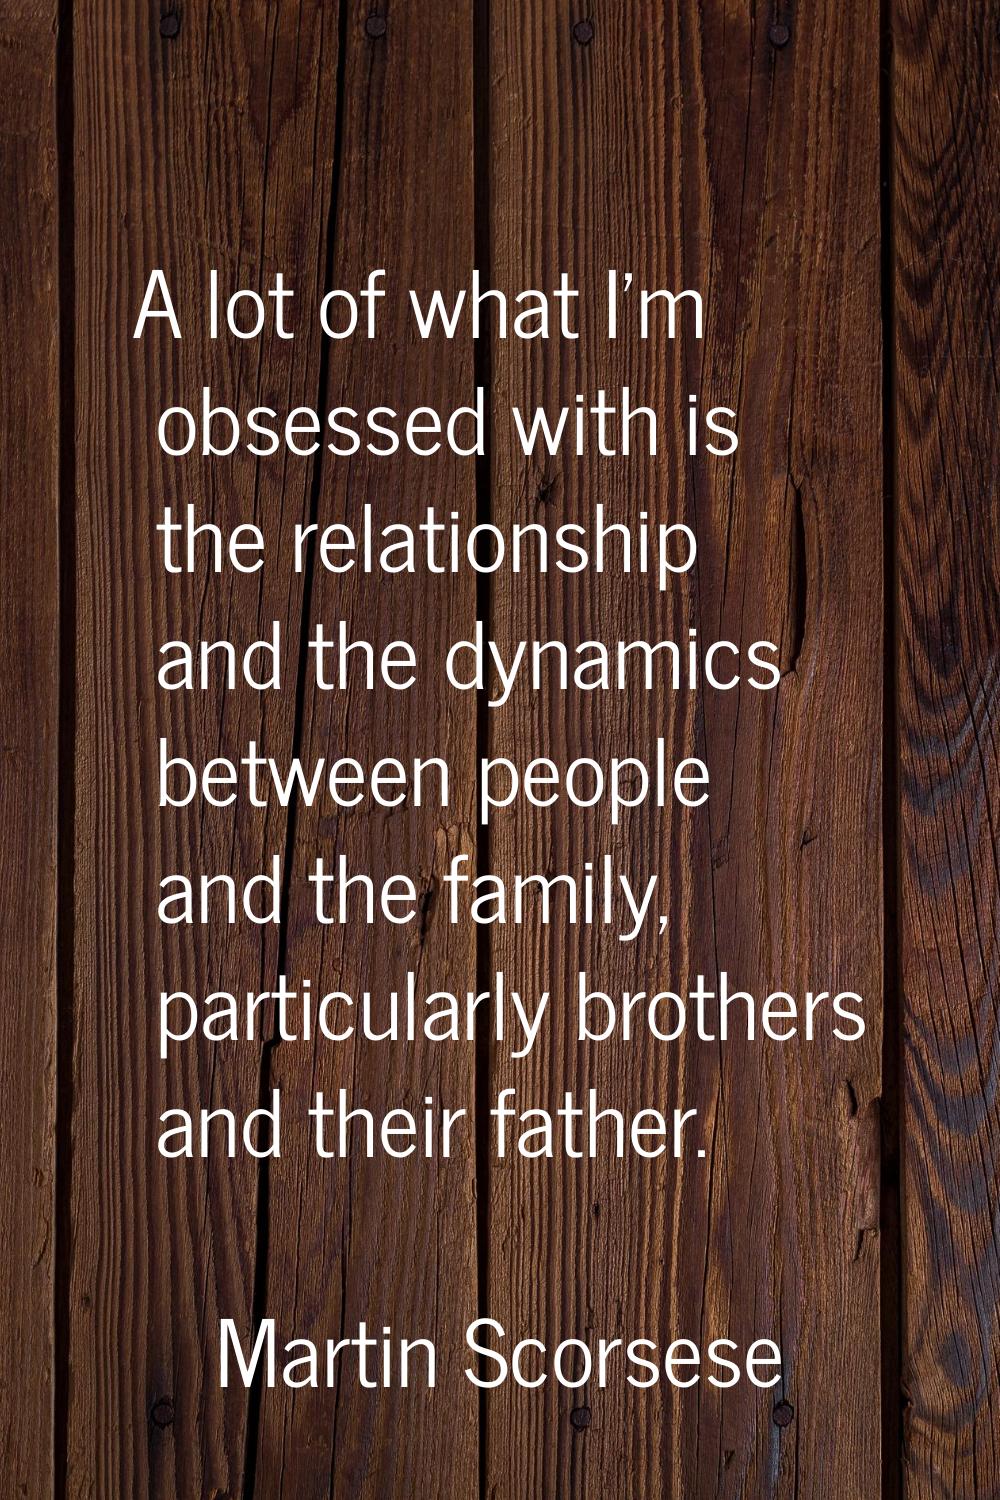 A lot of what I'm obsessed with is the relationship and the dynamics between people and the family,